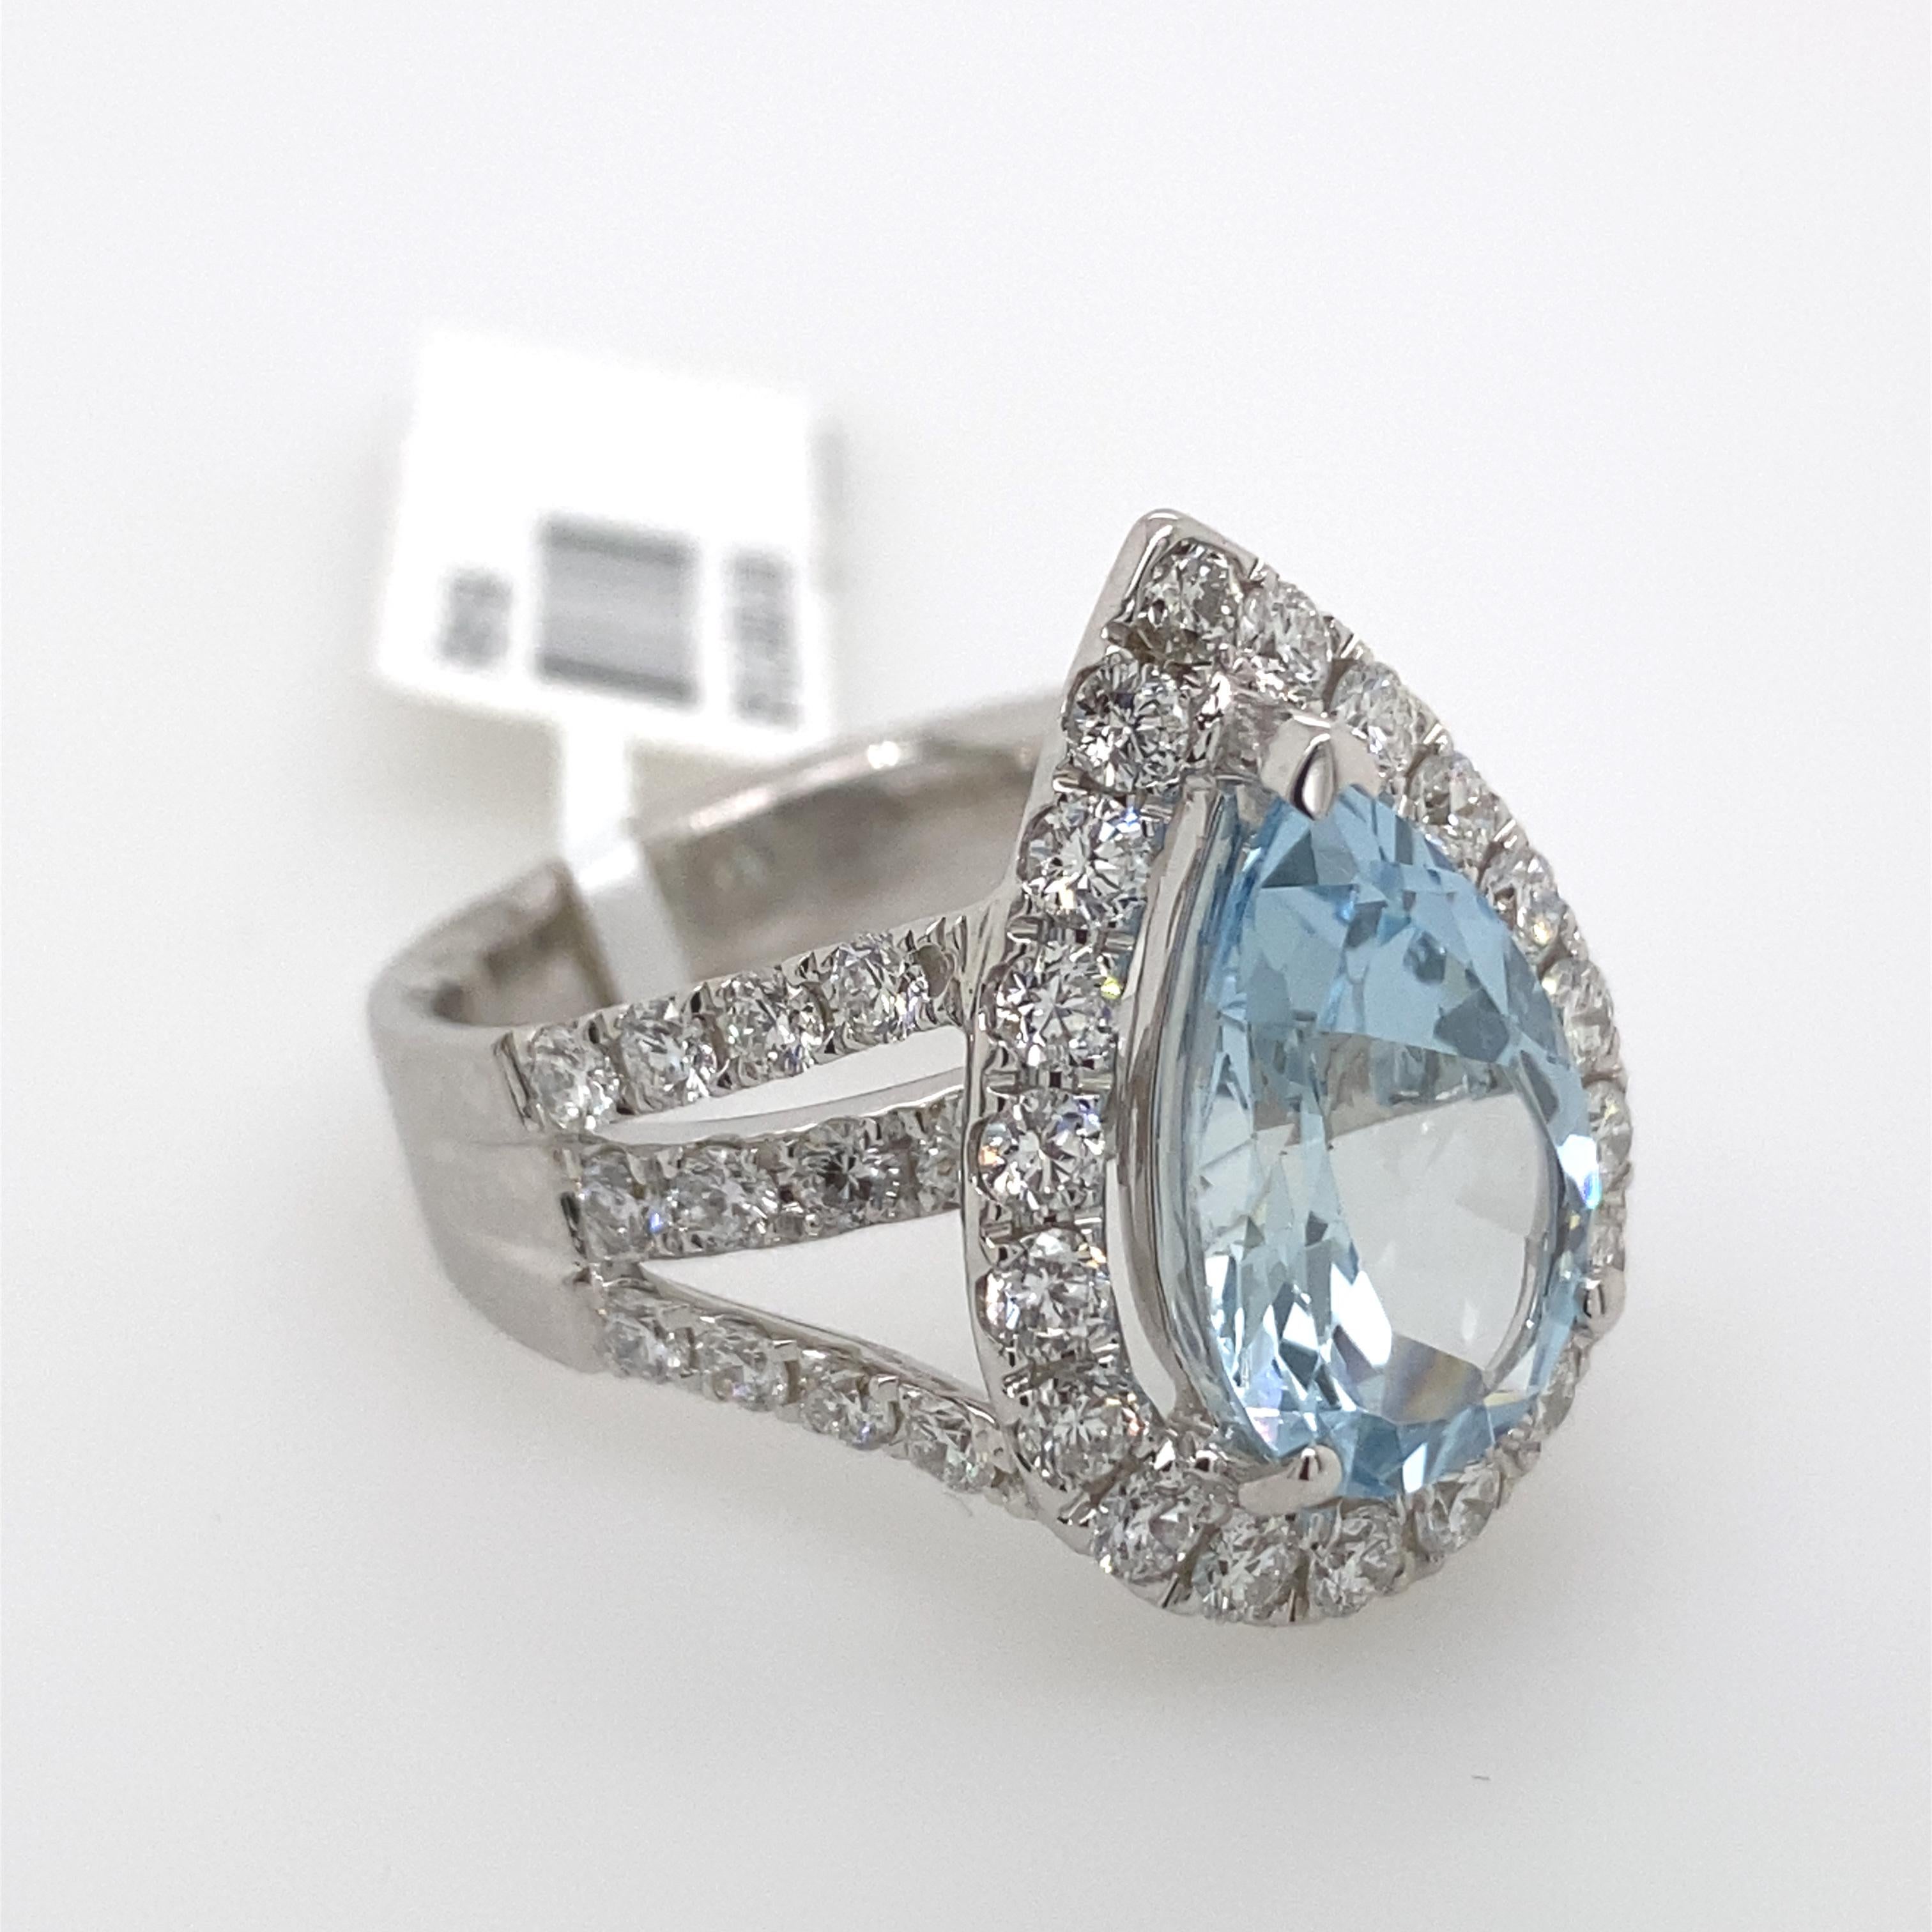 Exquisite aquamarine and diamond ring. 
3.63ct pear aquamarine surrounded by 1.74ct of round brilliant diamonds. 5.37ct total gemstone weight, set in 18-karat white gold.
Accommodated with an up to date appraisal by a GIA G.G., please contact us